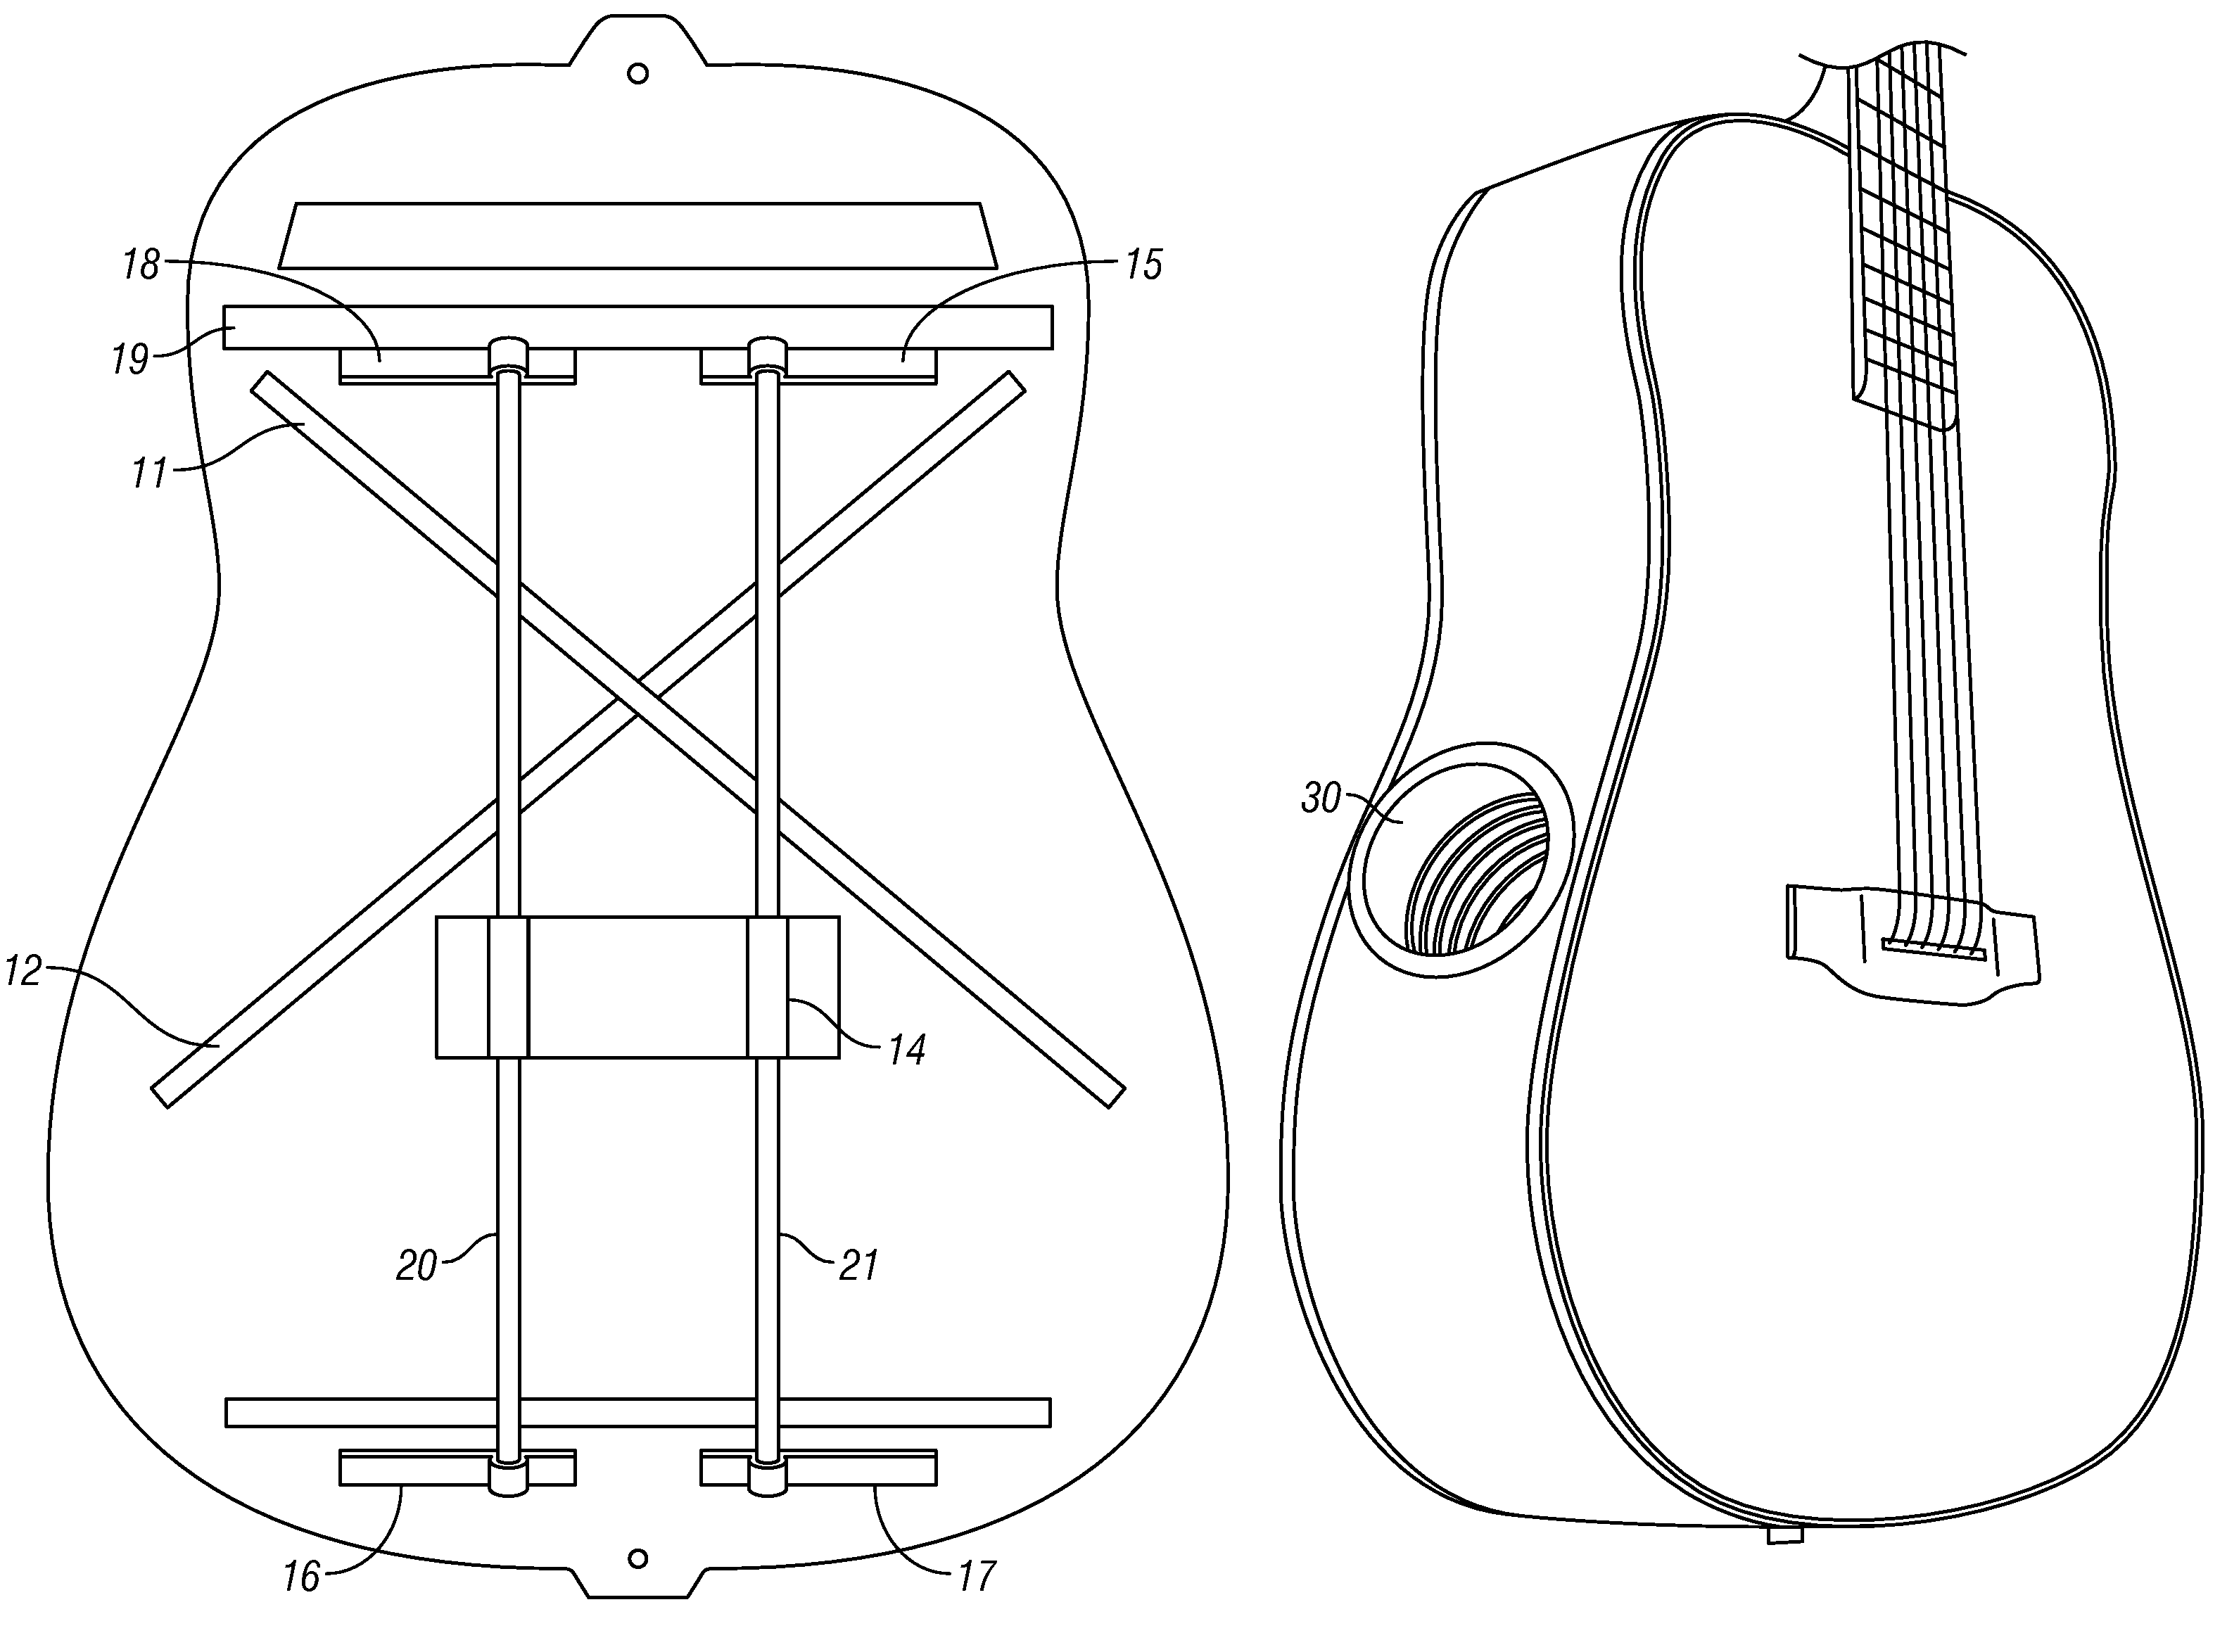 Suspended bracing system for acoustic musical instruments